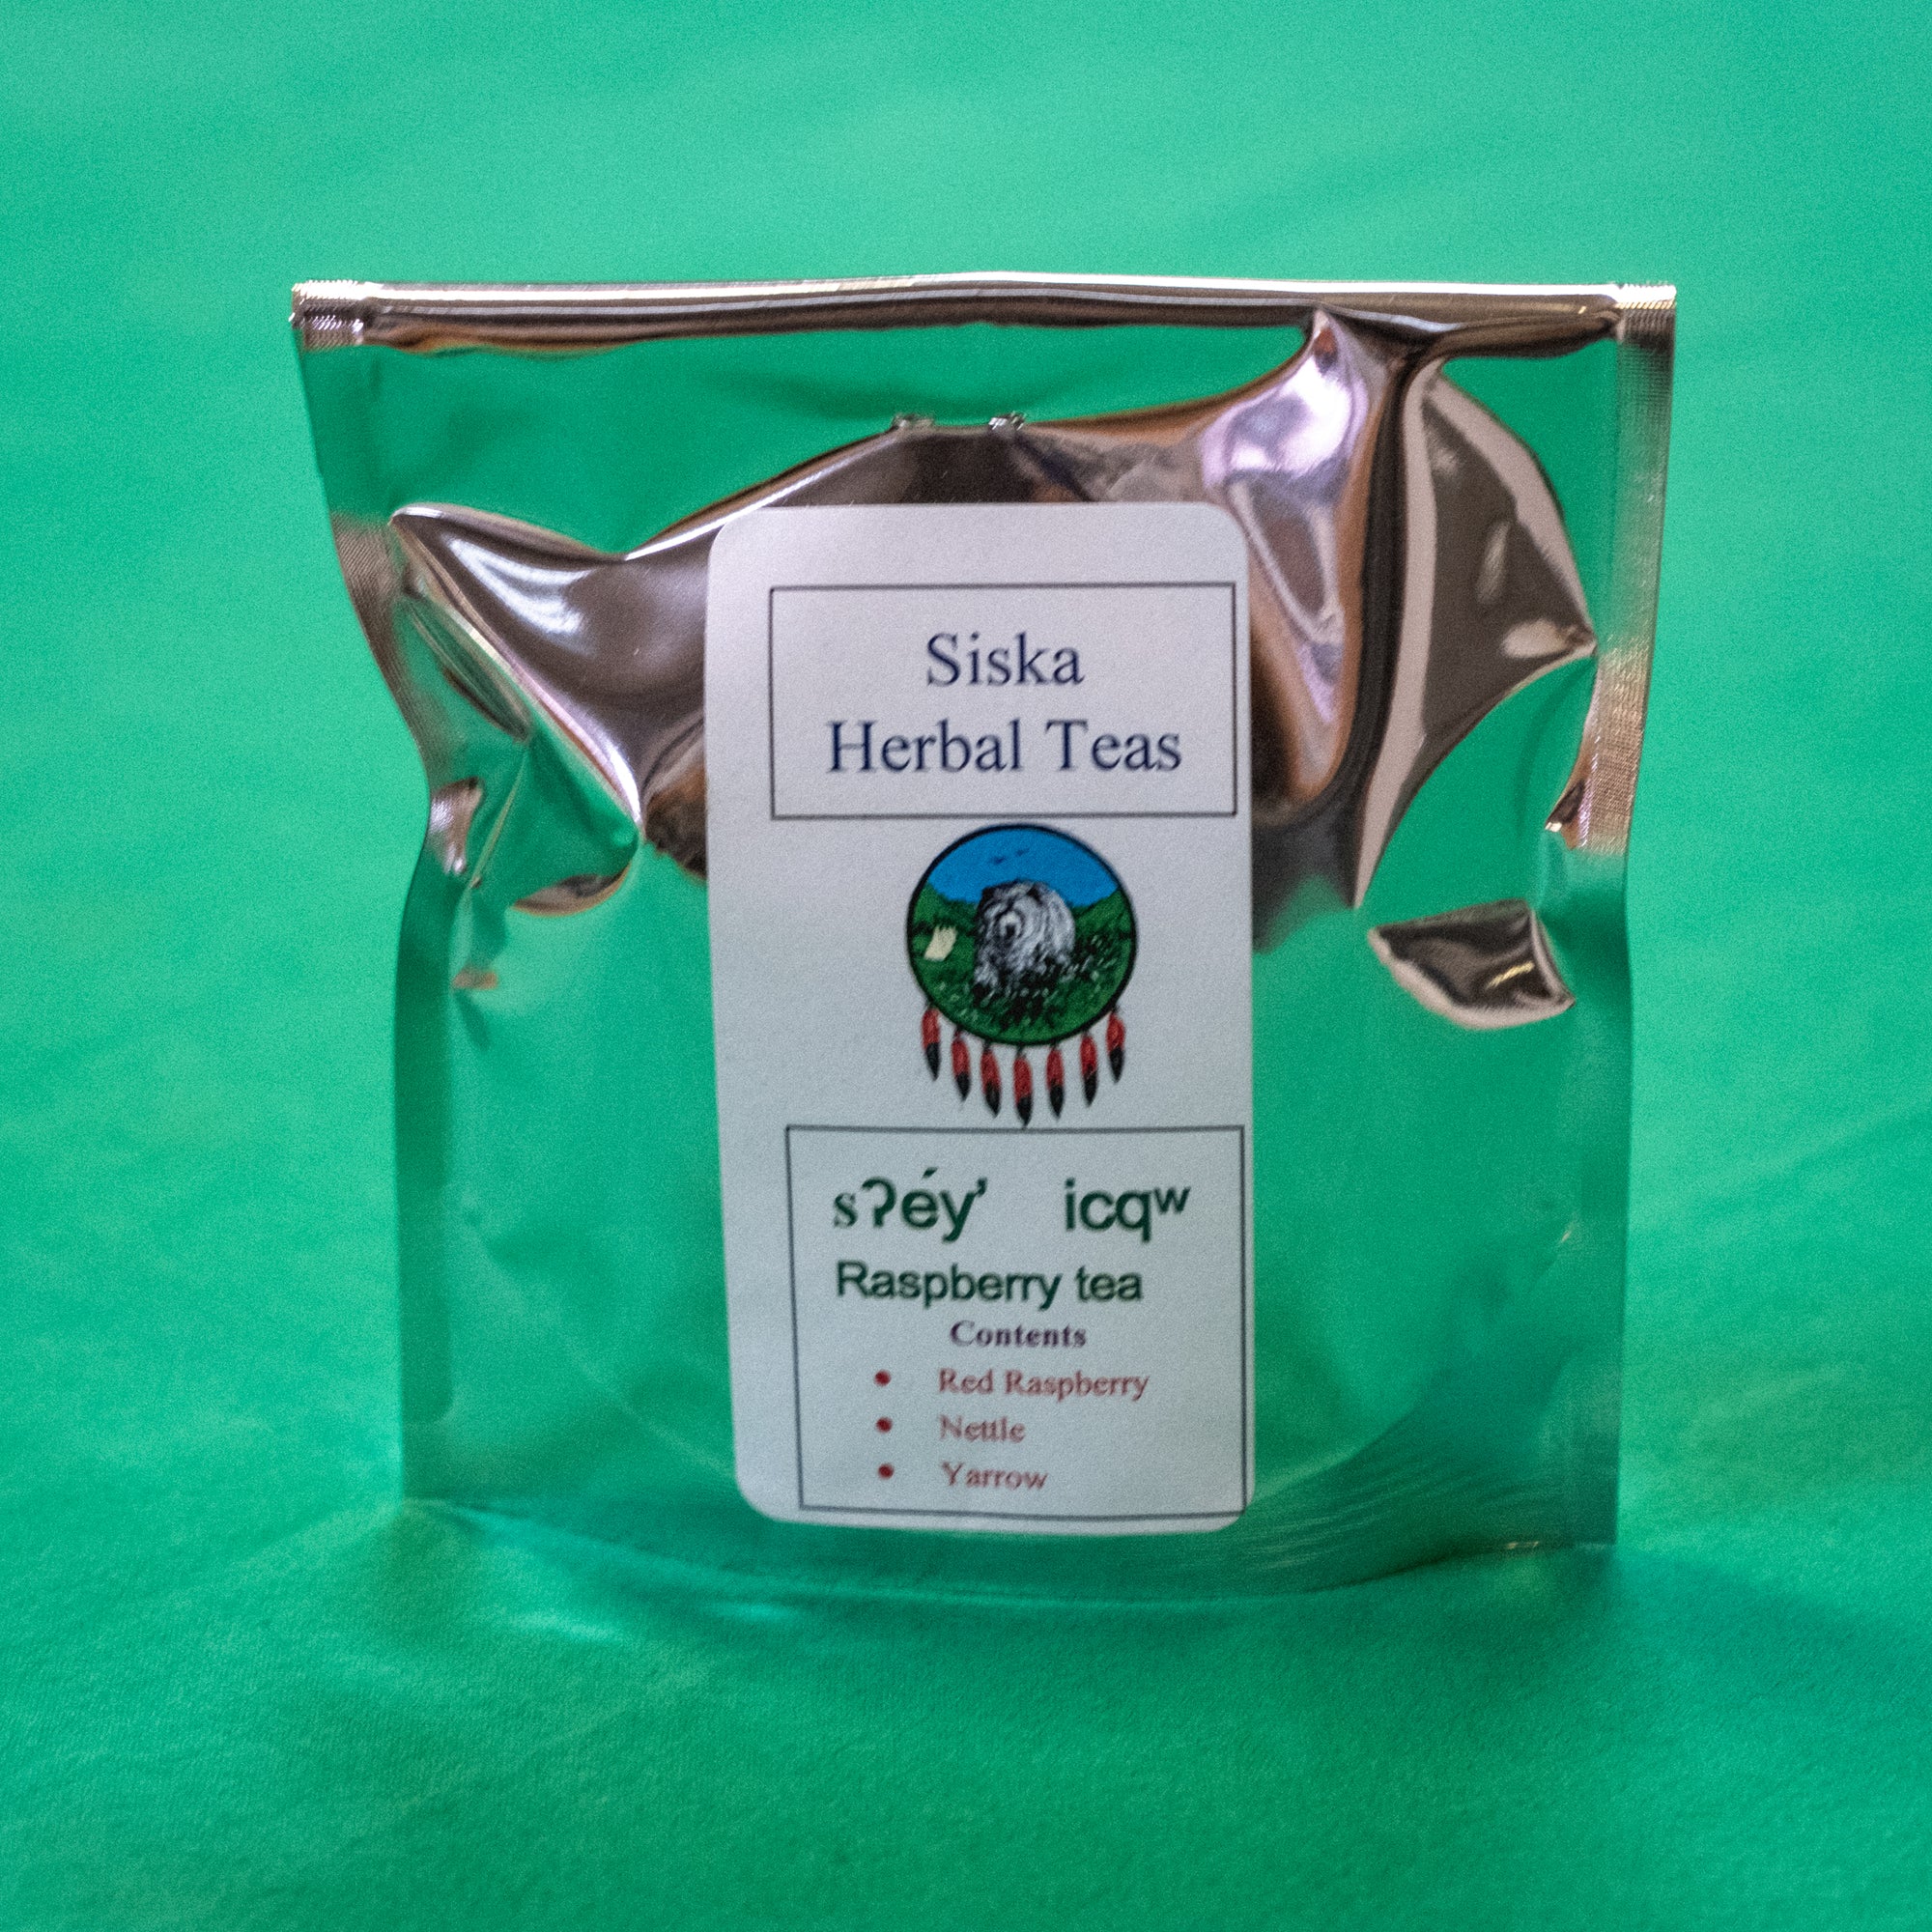 A bag of tea with a label that says "Siska Herbal Teas. Raspberry tea. Contents red raspberry, nettle, yarrow." End of image description.